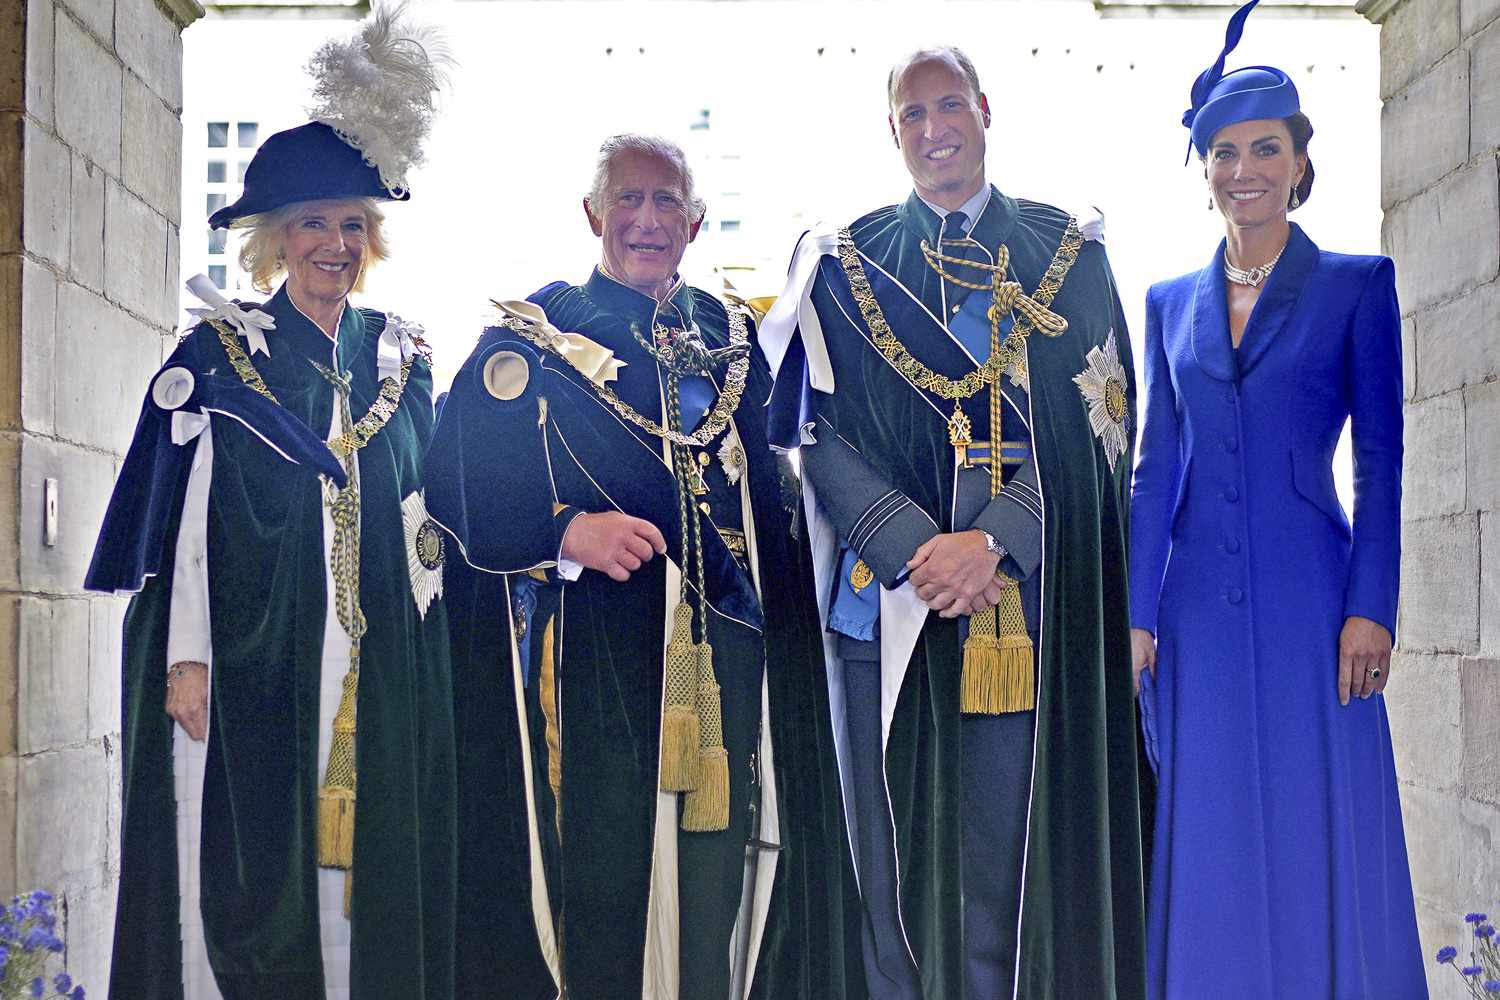 Britain's Queen Camilla, Britain's King Charles III, Britain's Prince William, Prince of Wales and Britain's Catherine, Princess of Wales pose for a photograph after watching a fly-past by the British Royal Air Force's (RAF) aerobatic team, the "Red Arrows", from the Palace of Holyroodhouse, in Edinburgh on July 5, 2023, following a National Service of Thanksgiving and Dedication. Scotland on Wednesday marked the Coronation of King Charles III and Queen Camilla during a National Service of Thanksgiving and Dedication where the The King was presented with the Honours of Scotland